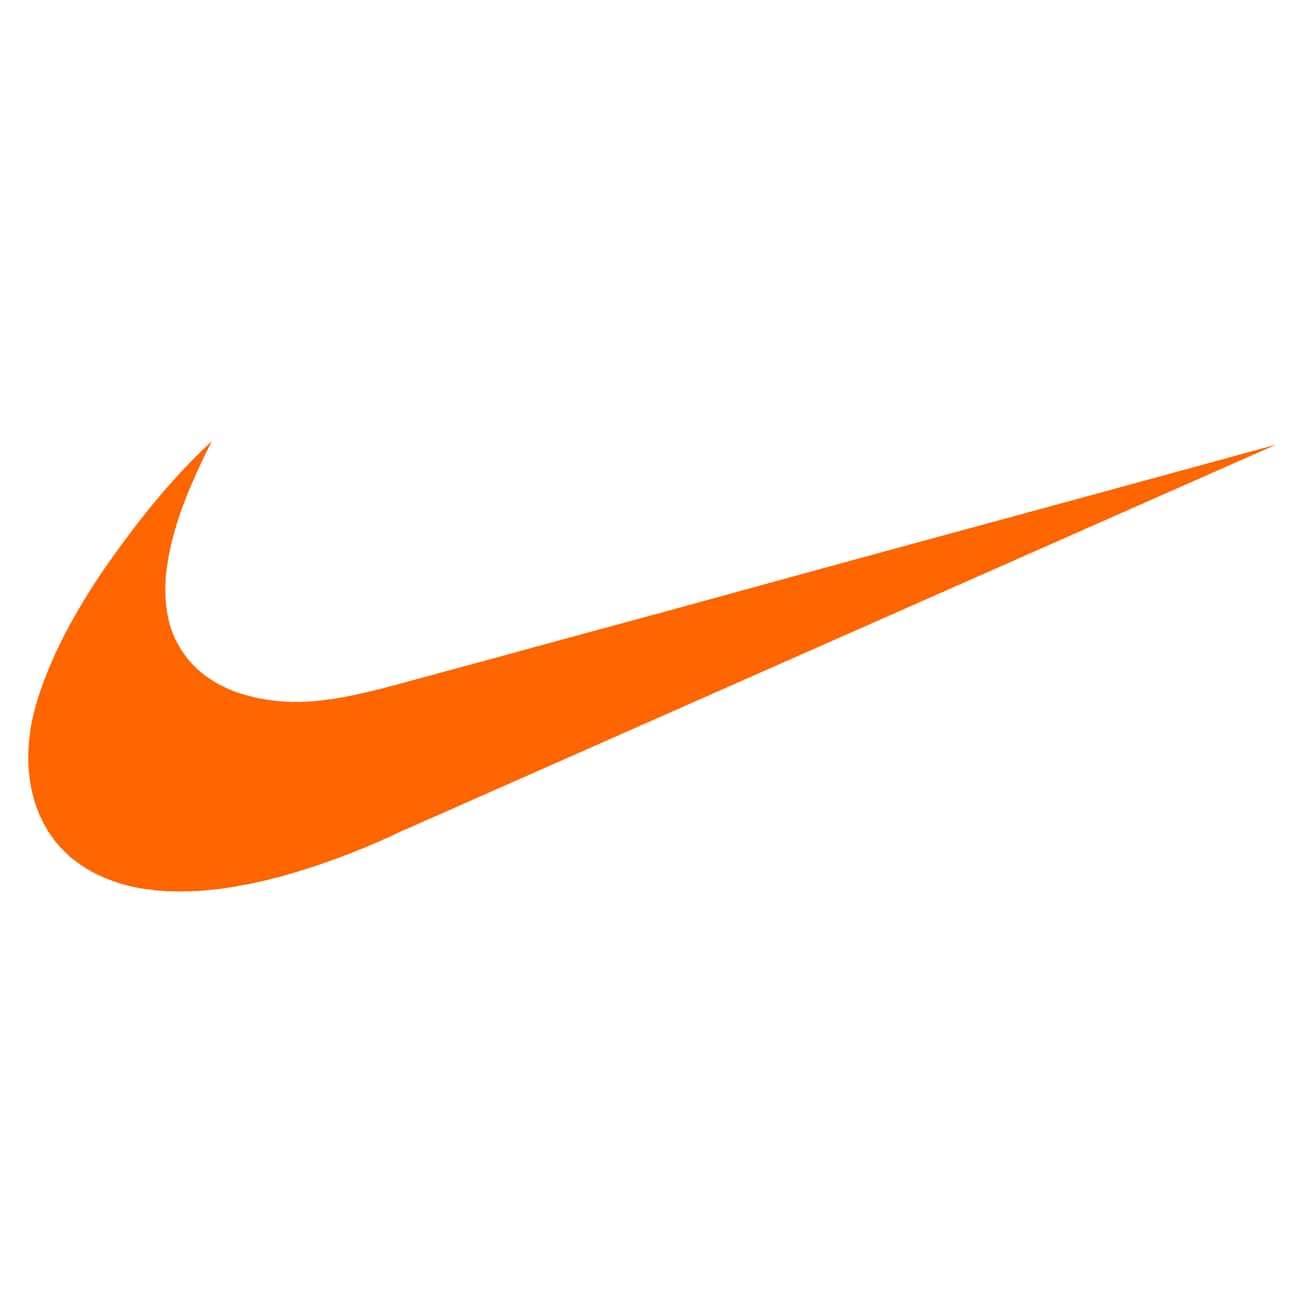 Nike Frequently Manipulates Free Agency